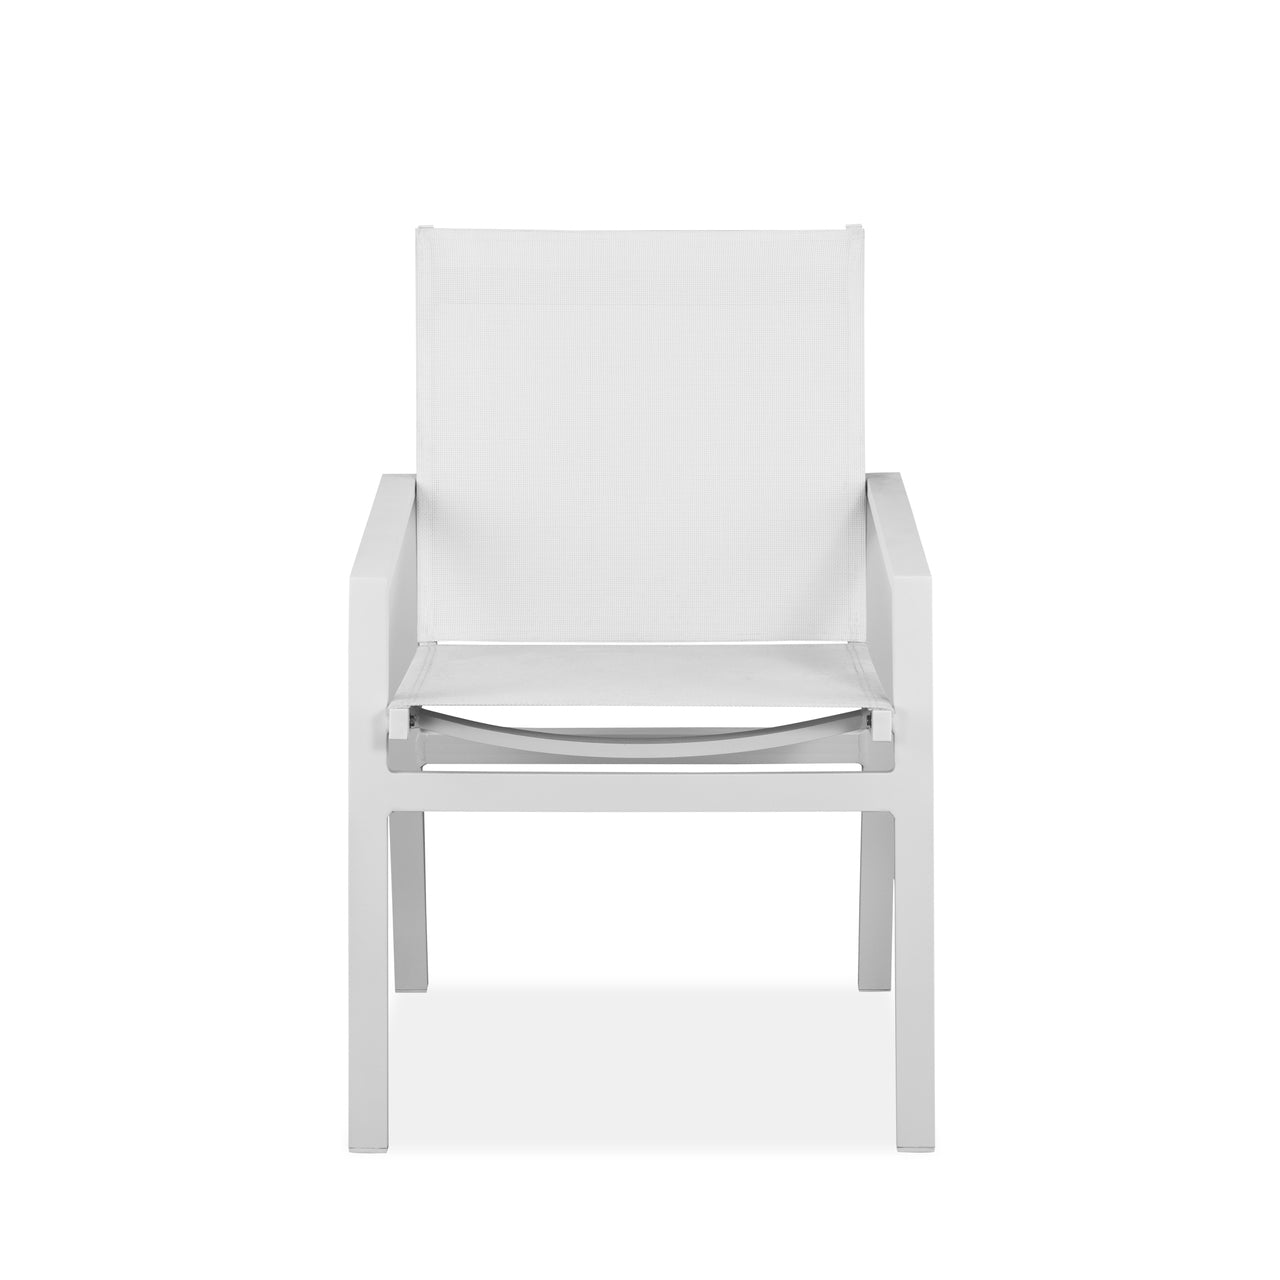 Rio Outdoor Dining Armchair - Set of 2 by Whiteline